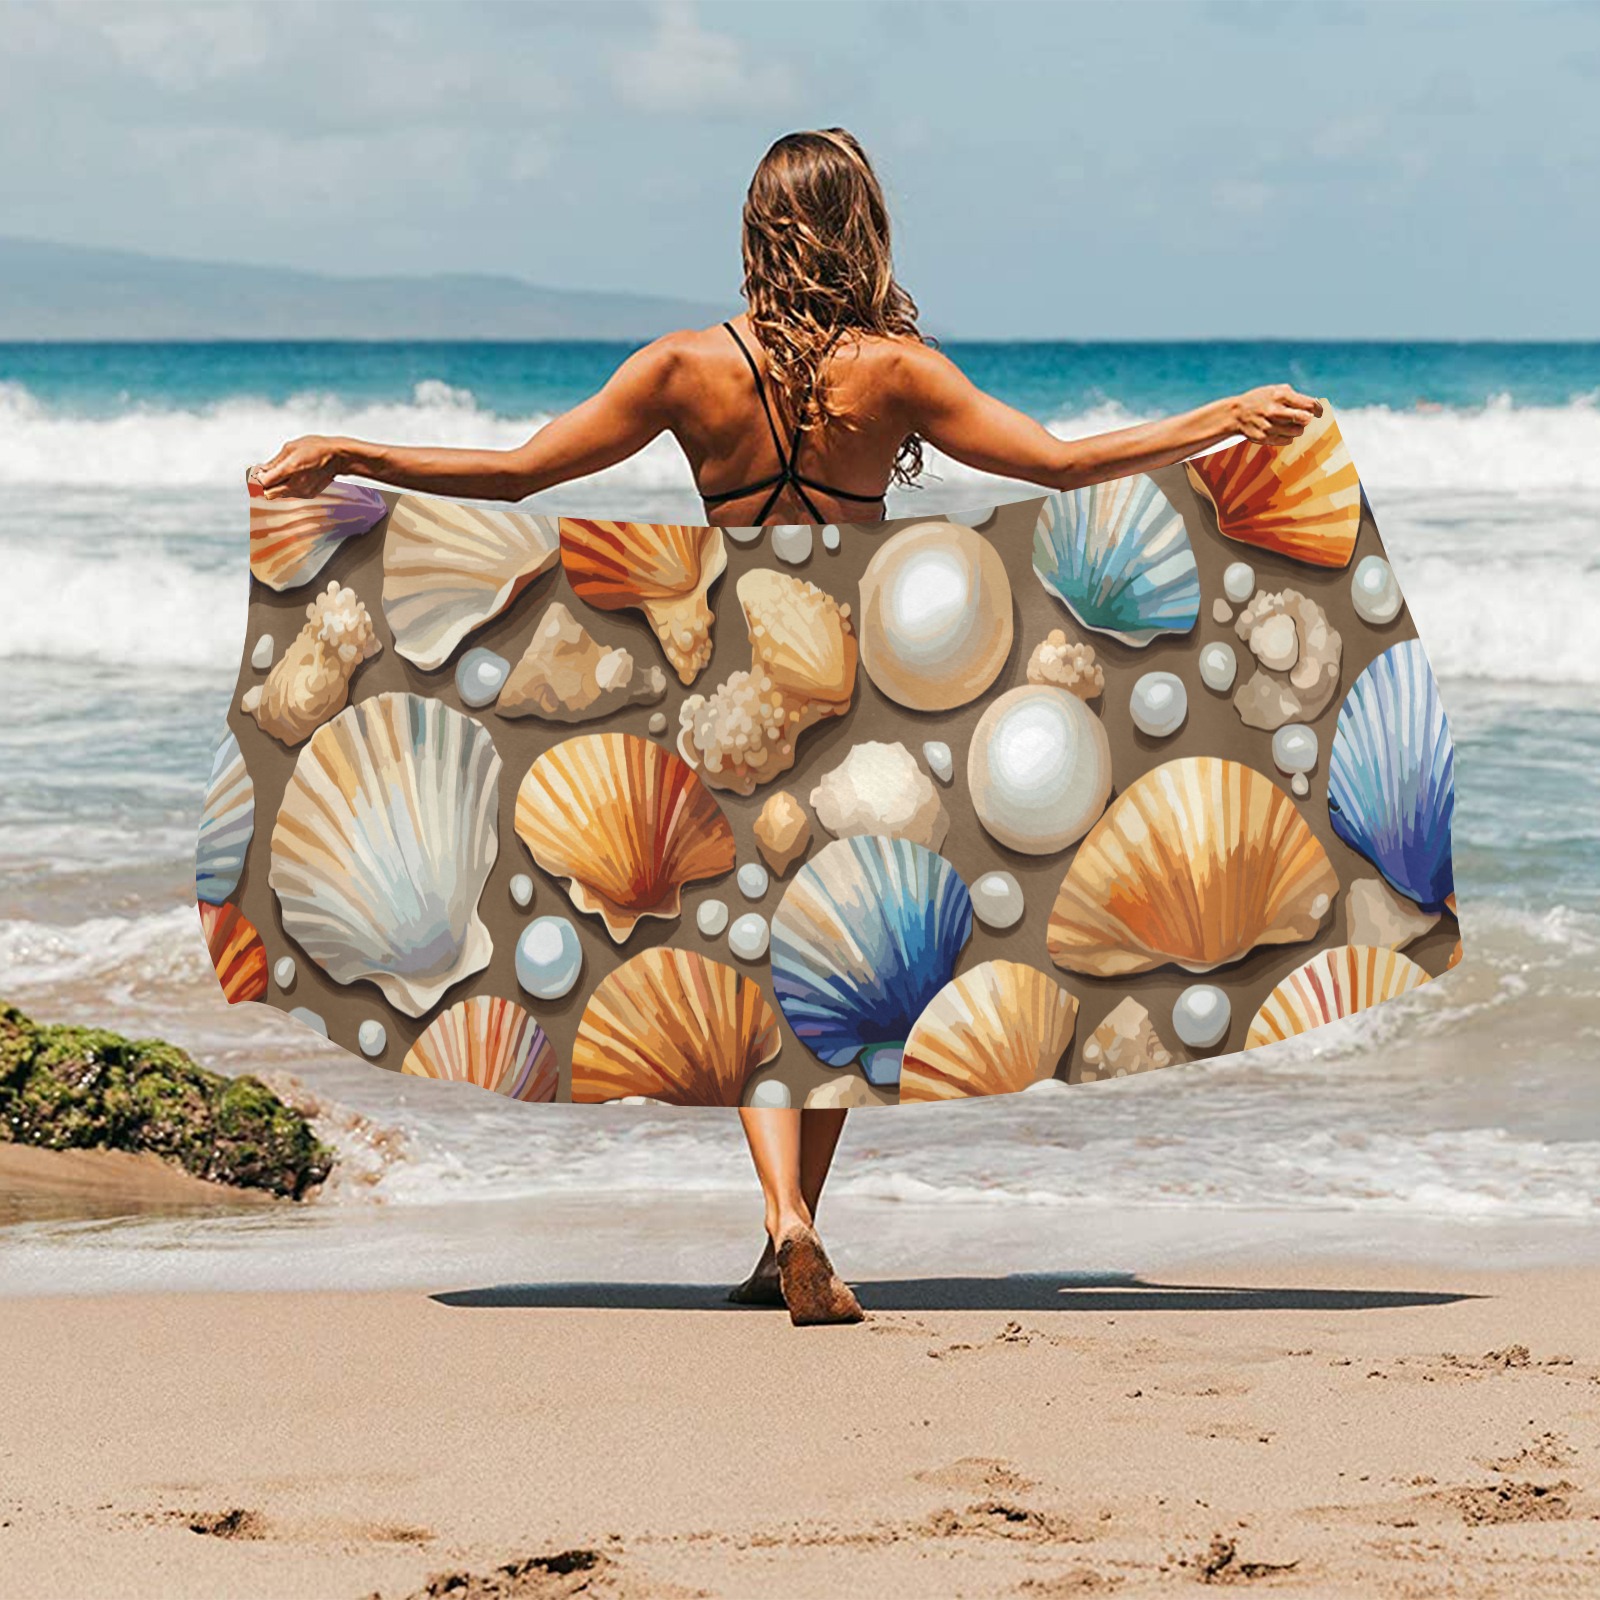 A mix of pearls, shells on the sand colorful art. Beach Towel 32"x 71"